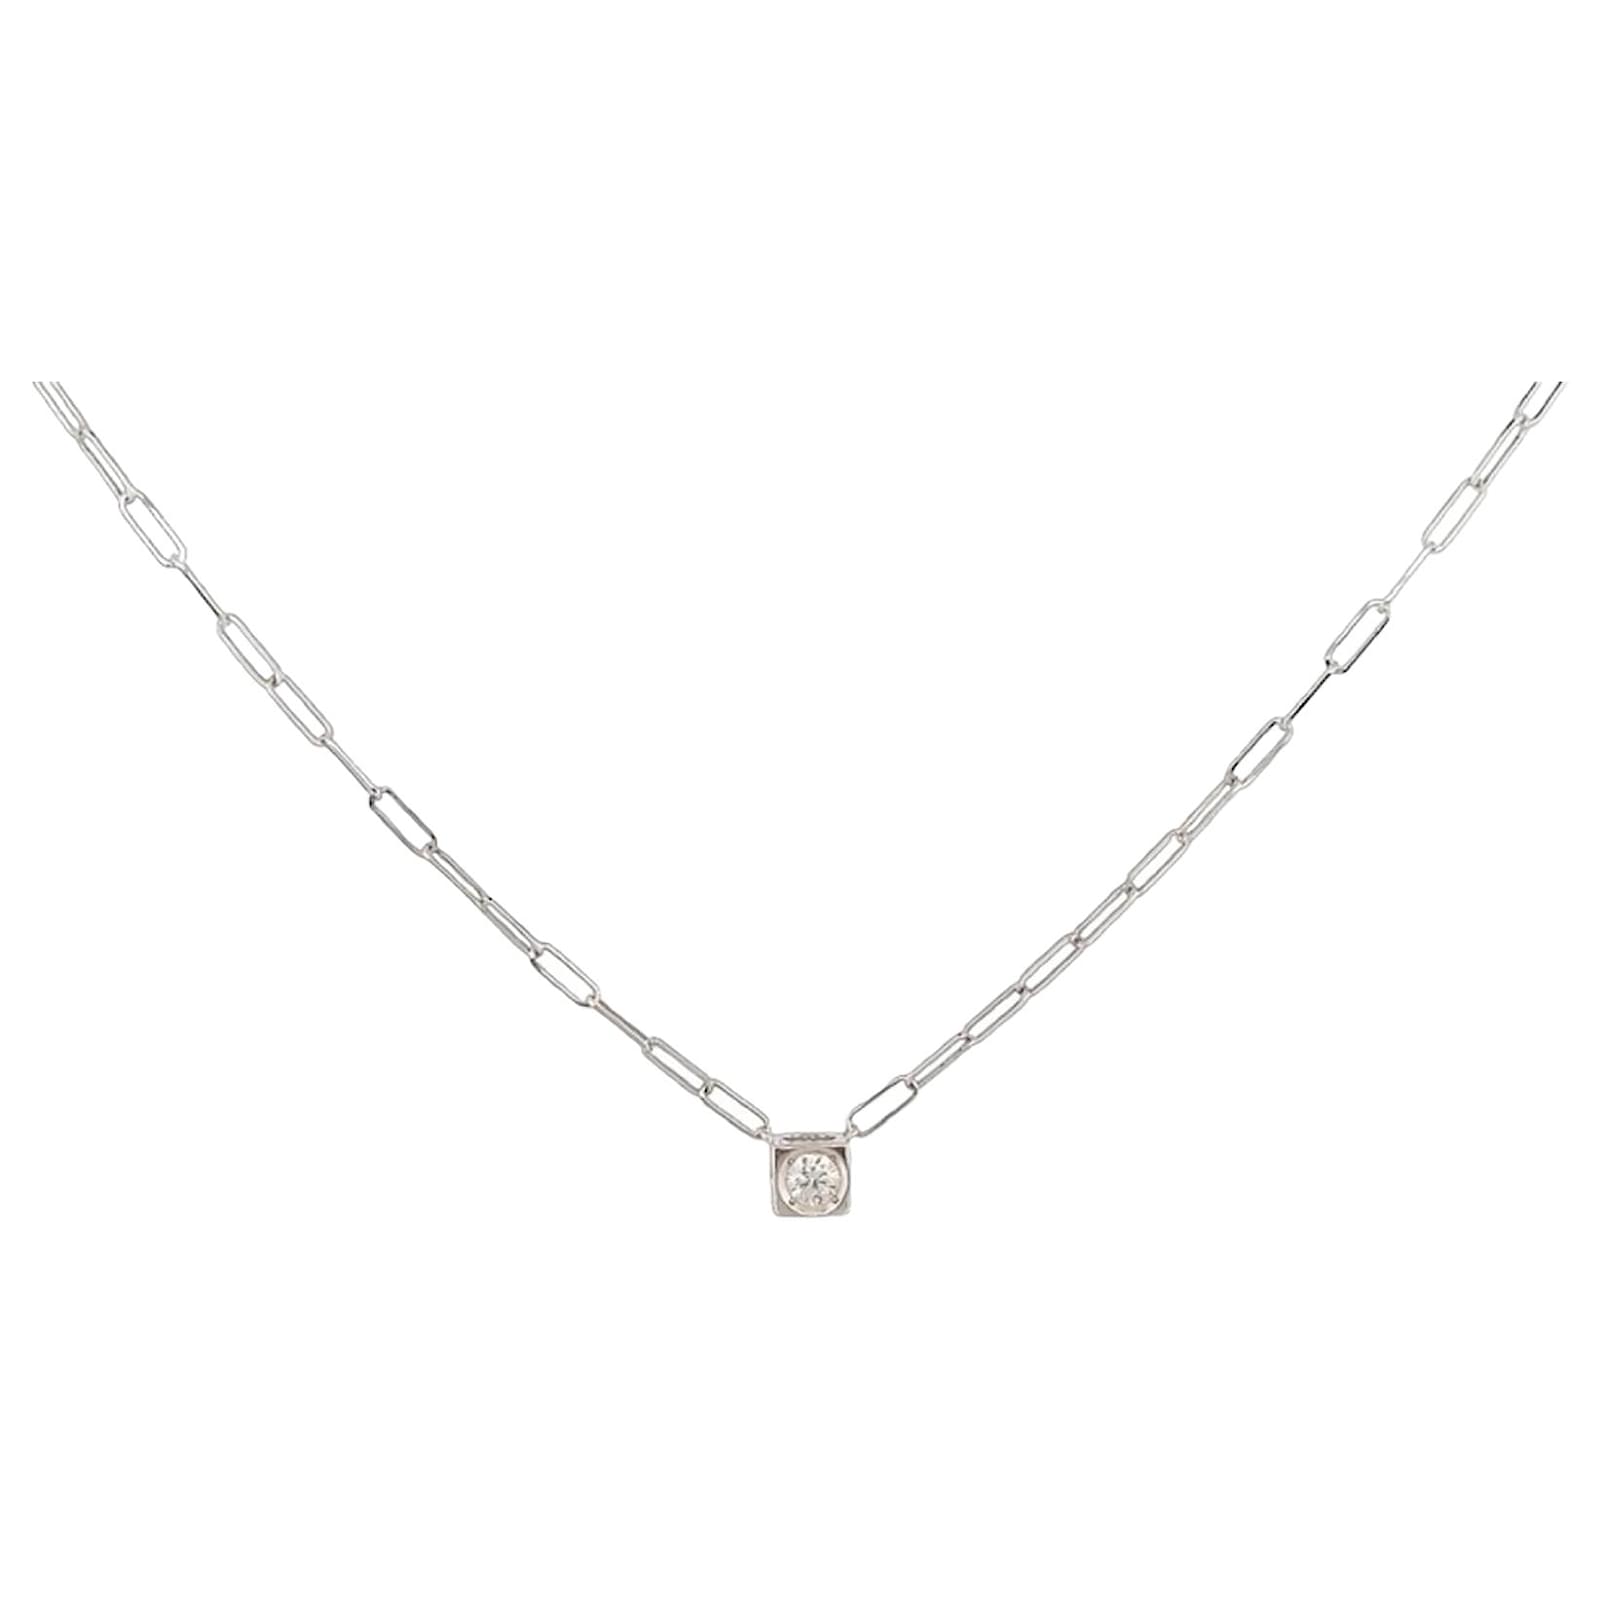 Buy wholesale SIMPLE NECKLACE, 925 sterling silver necklace without pendant  35cm - silver